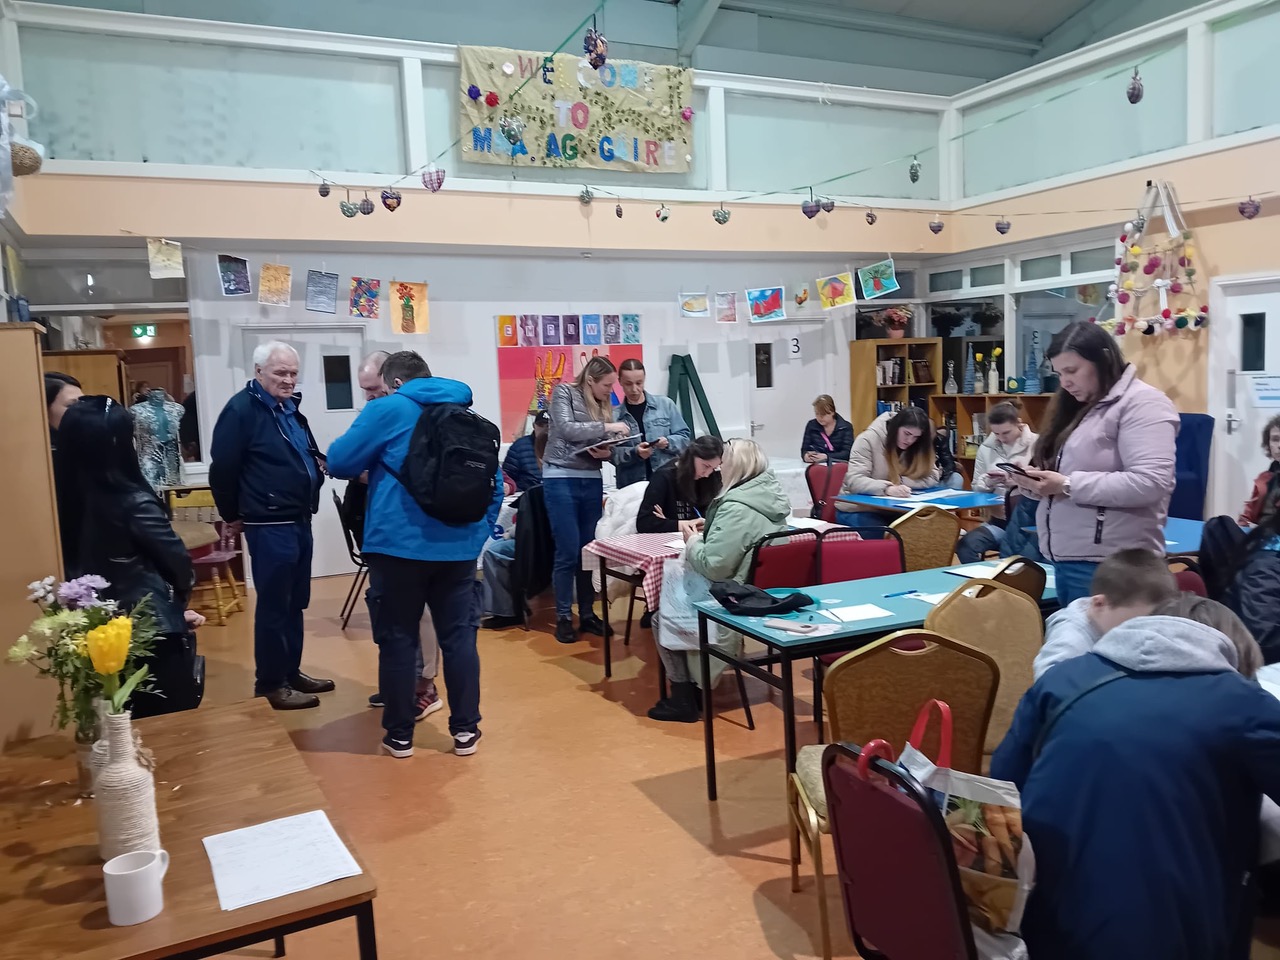 DISPLACED Ukrainians living in what was formerly the Rowan Tree Hostel have been informed their short-term emergency accommodation is to expire by the end of May.